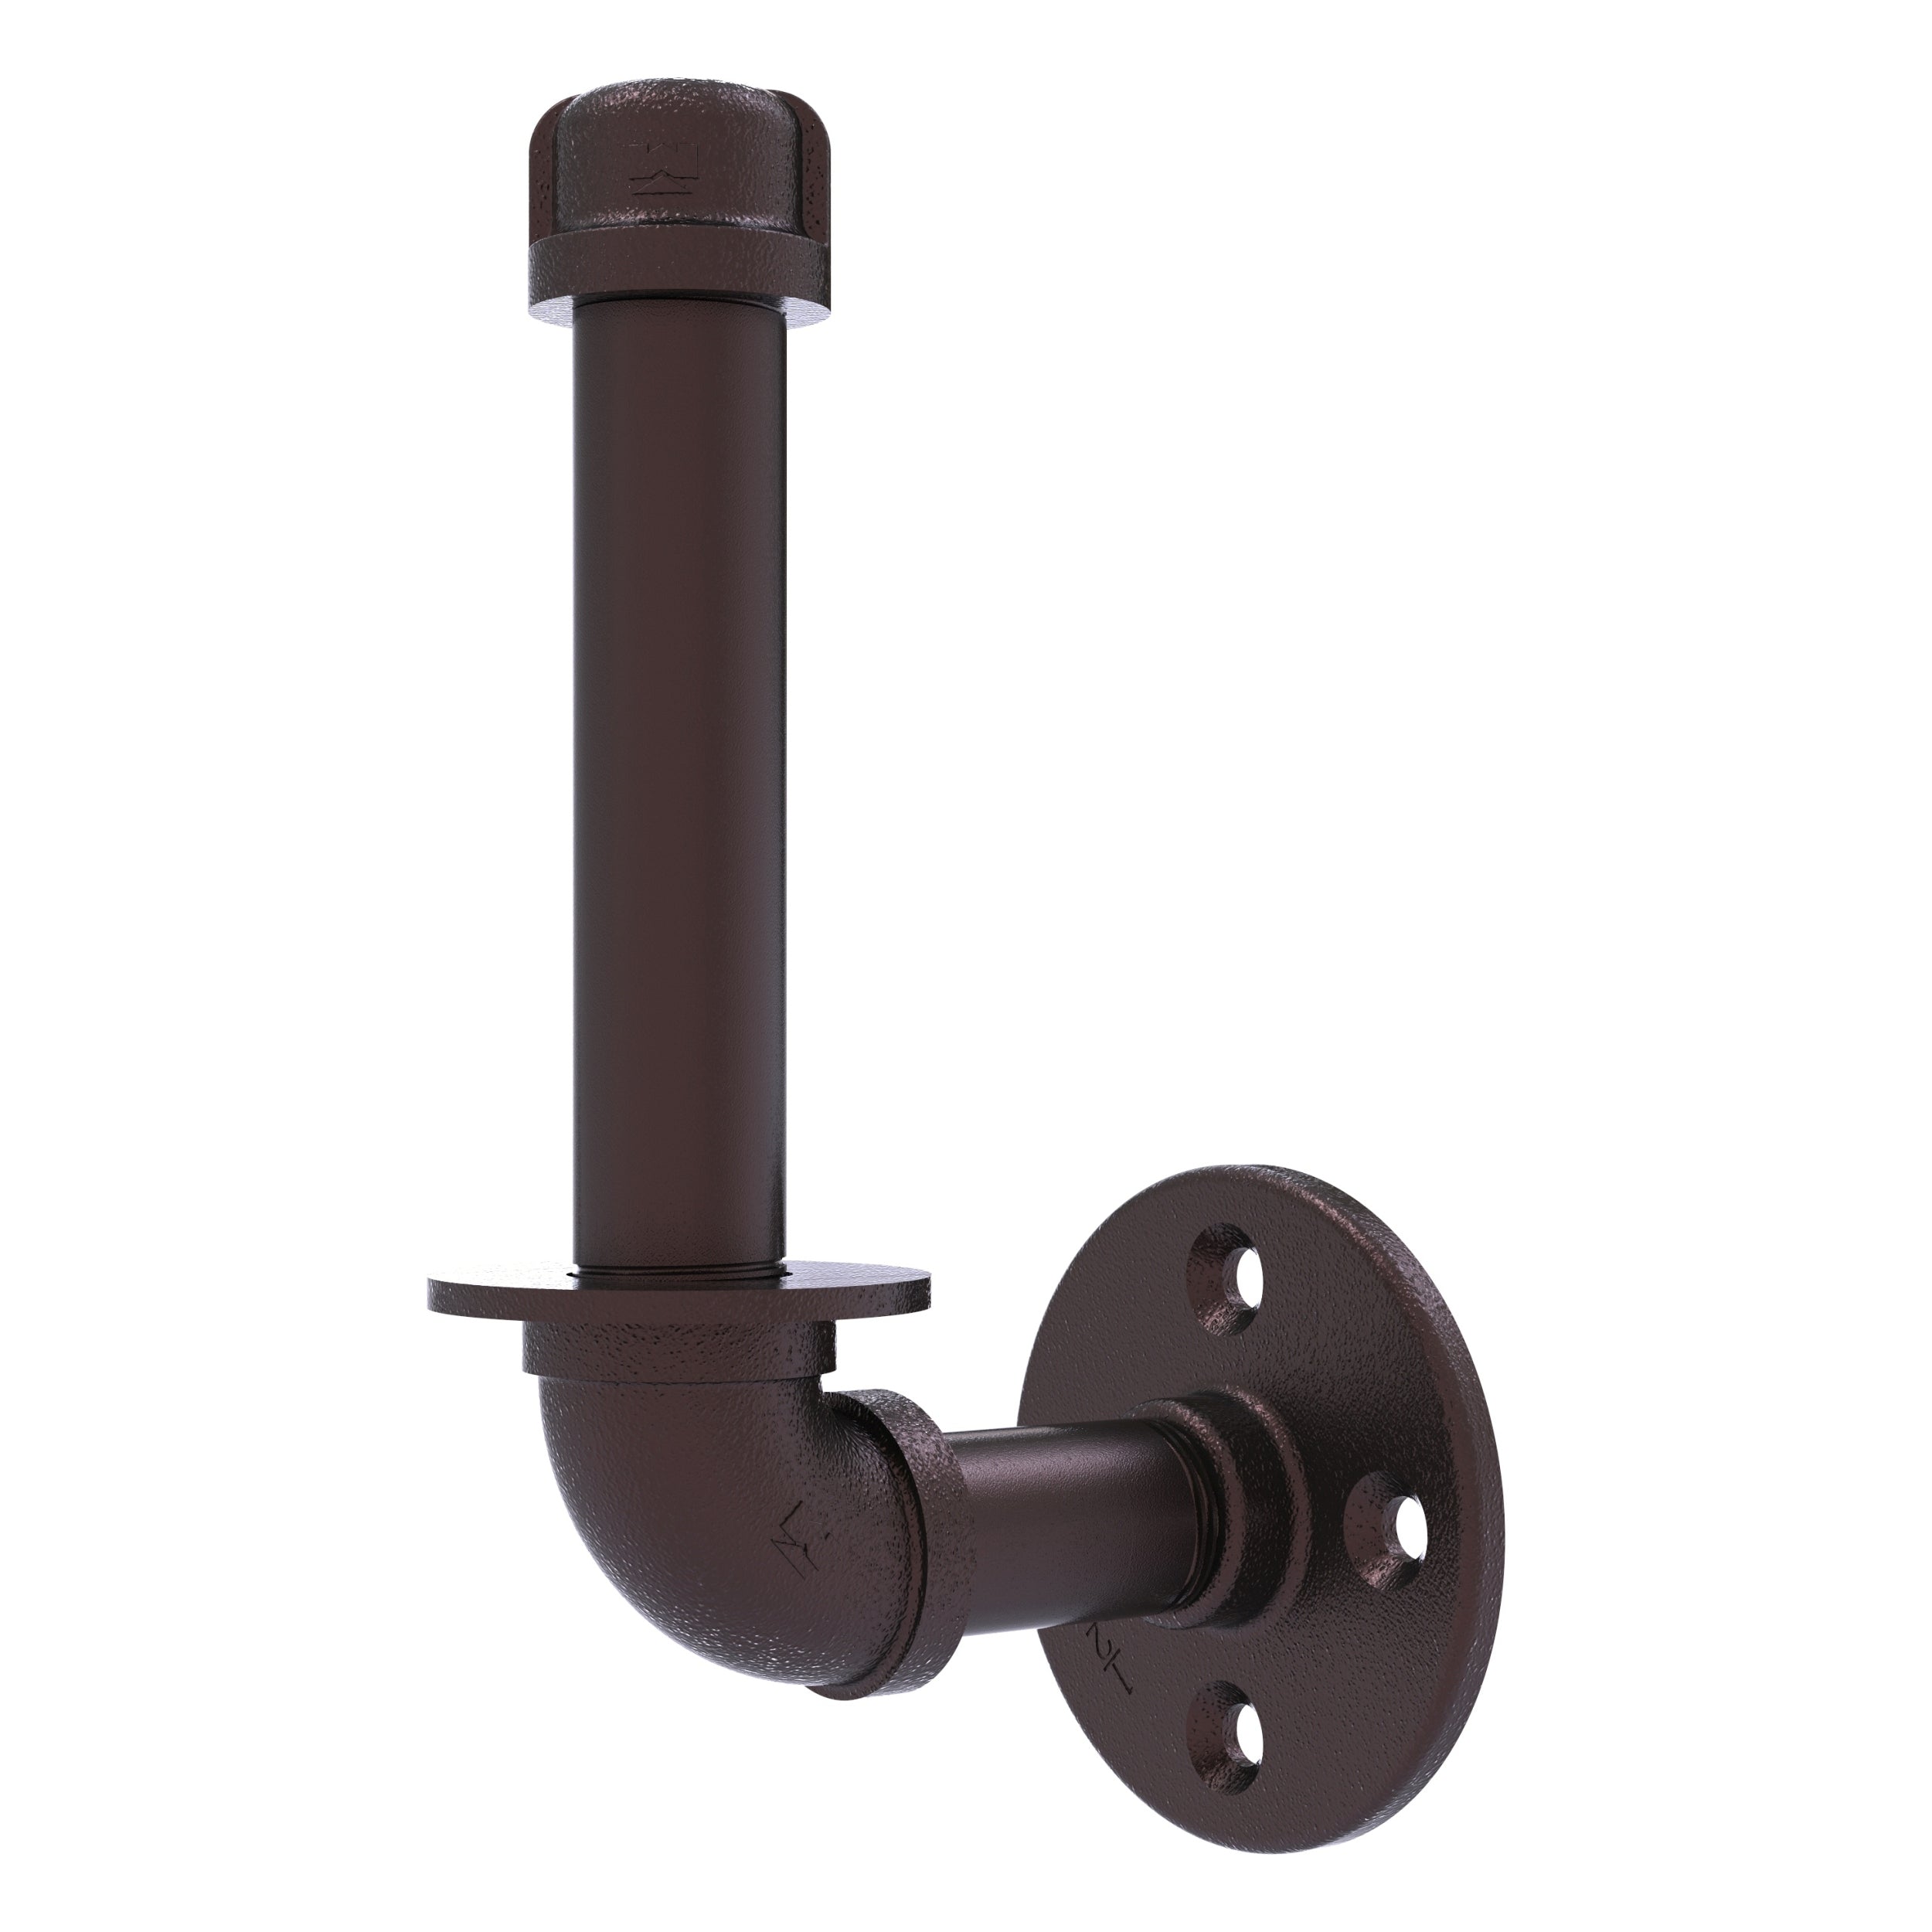 Allied Brass Pipeline Collection Under Cabinet Paper Towel Holder Oil Rubbed Bronze